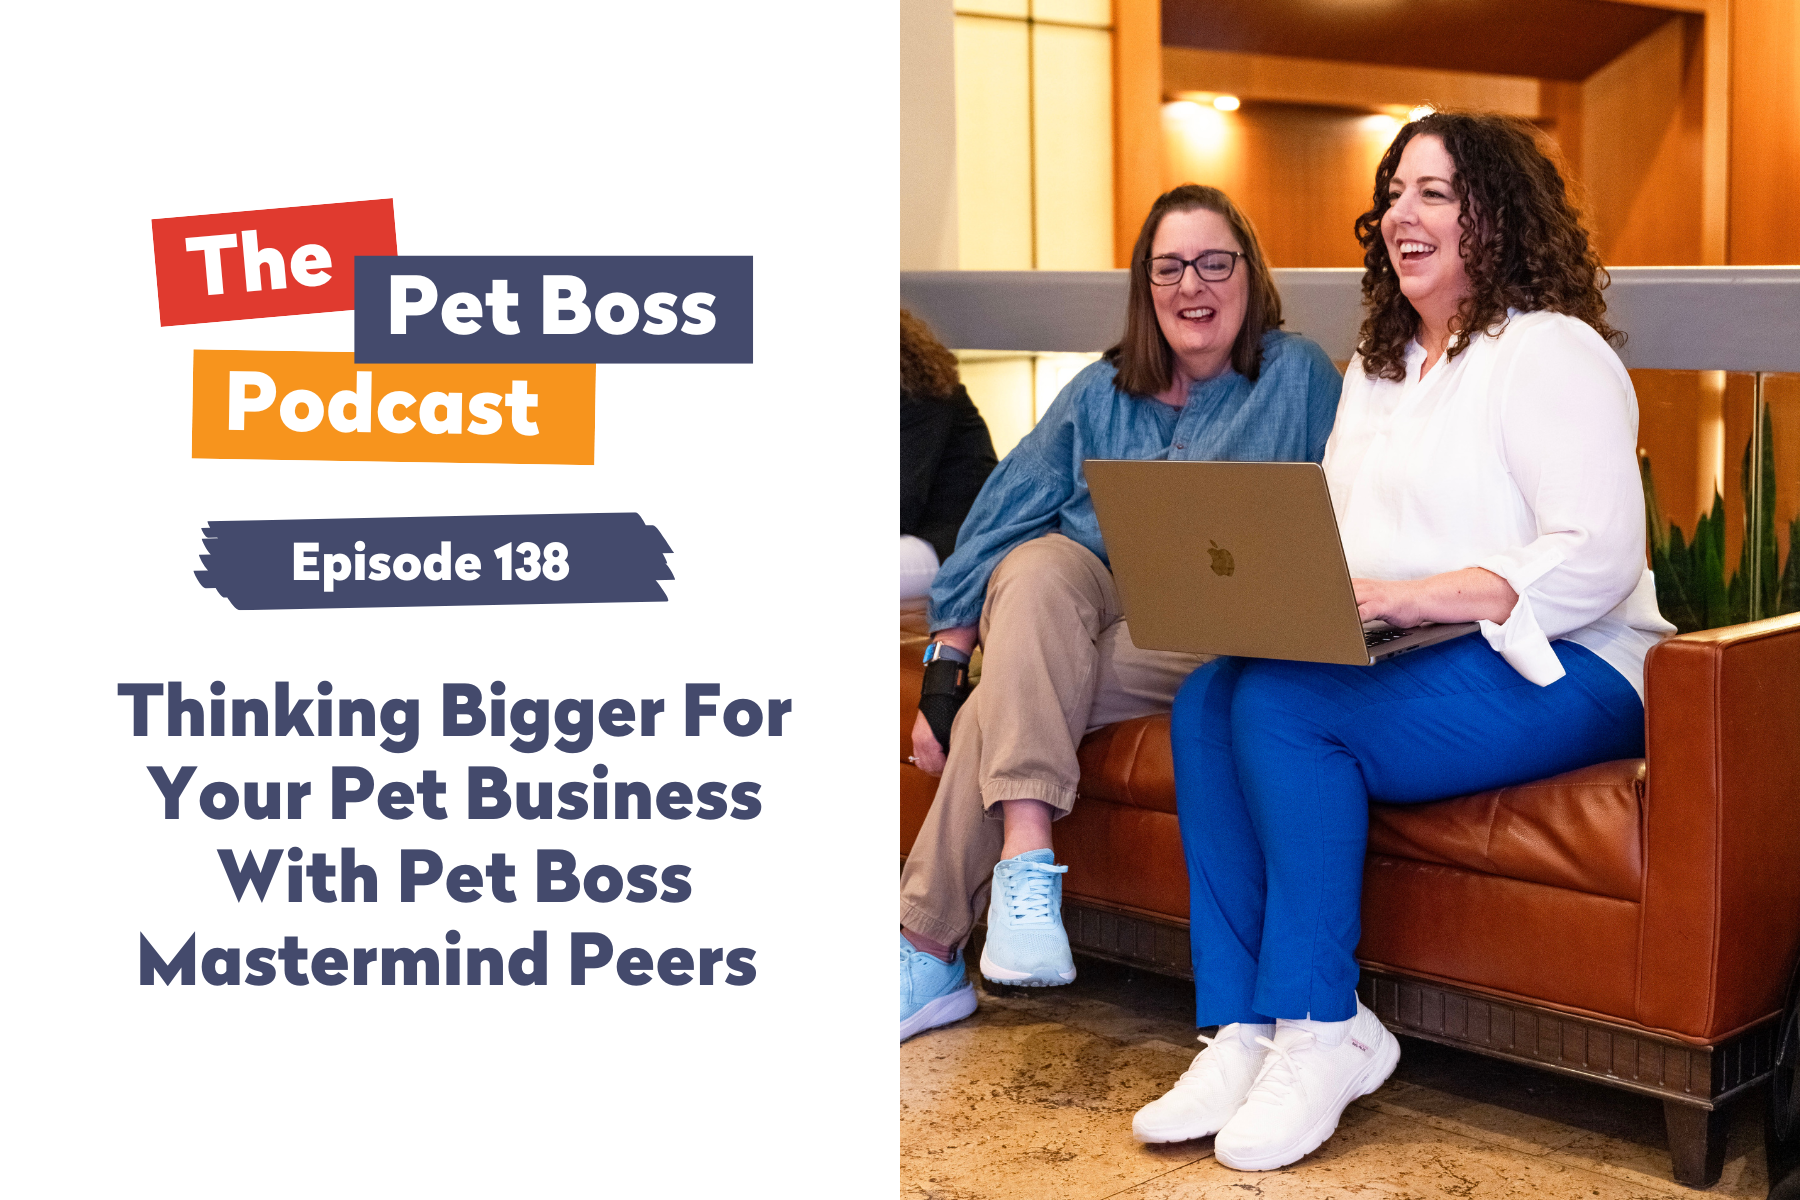 Episode 138 | Thinking Bigger For Your Pet Business With Pet Boss Mastermind Peers